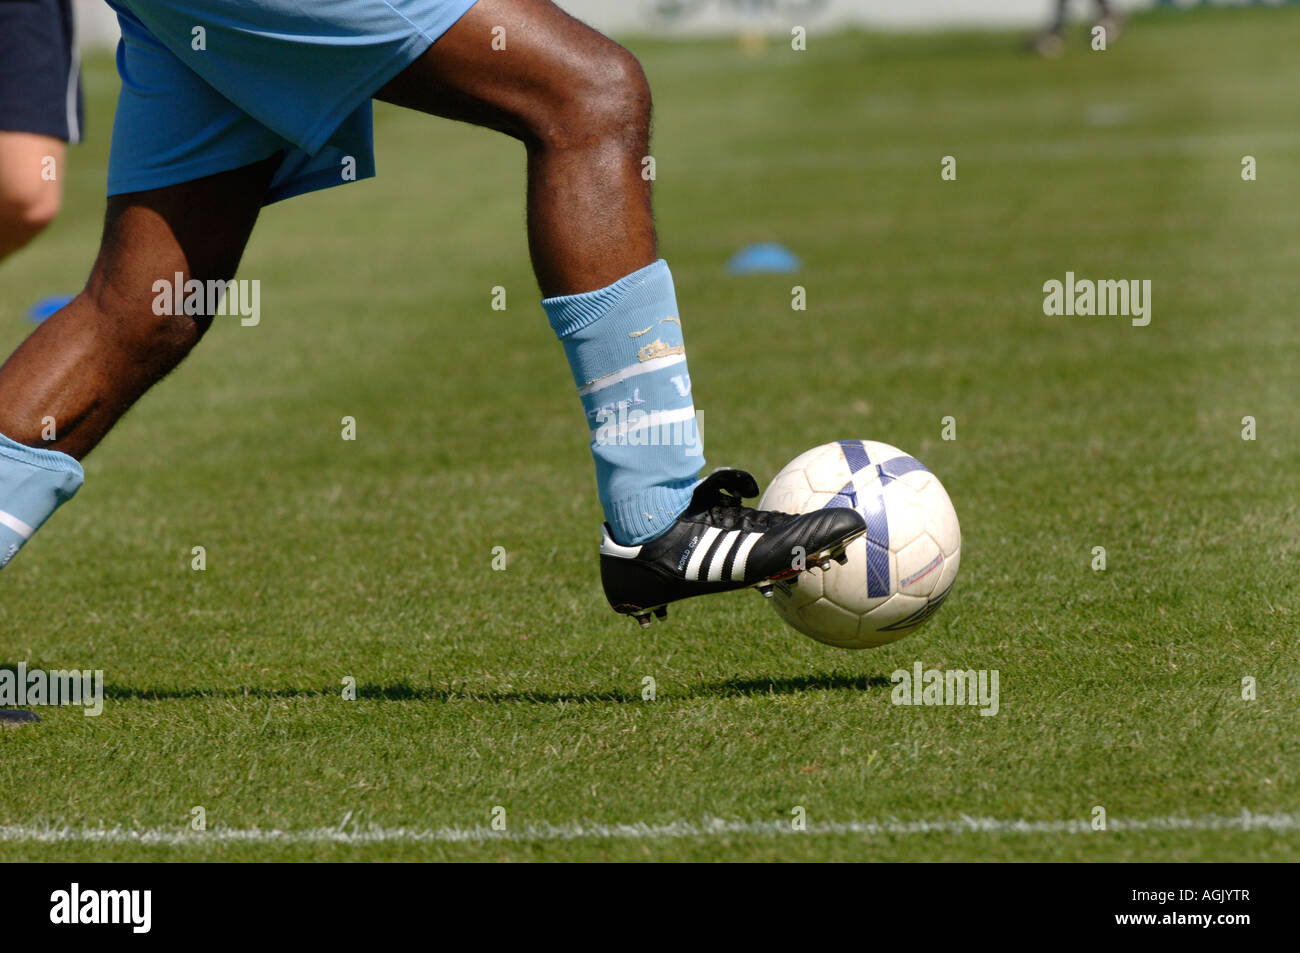 Soccer Player Receives Successful Pass And Kicks Ball To Score Amazing Goal  Doing Bicycle Kick Shot Made On A Stadium Championship Stock Photo -  Download Image Now - iStock